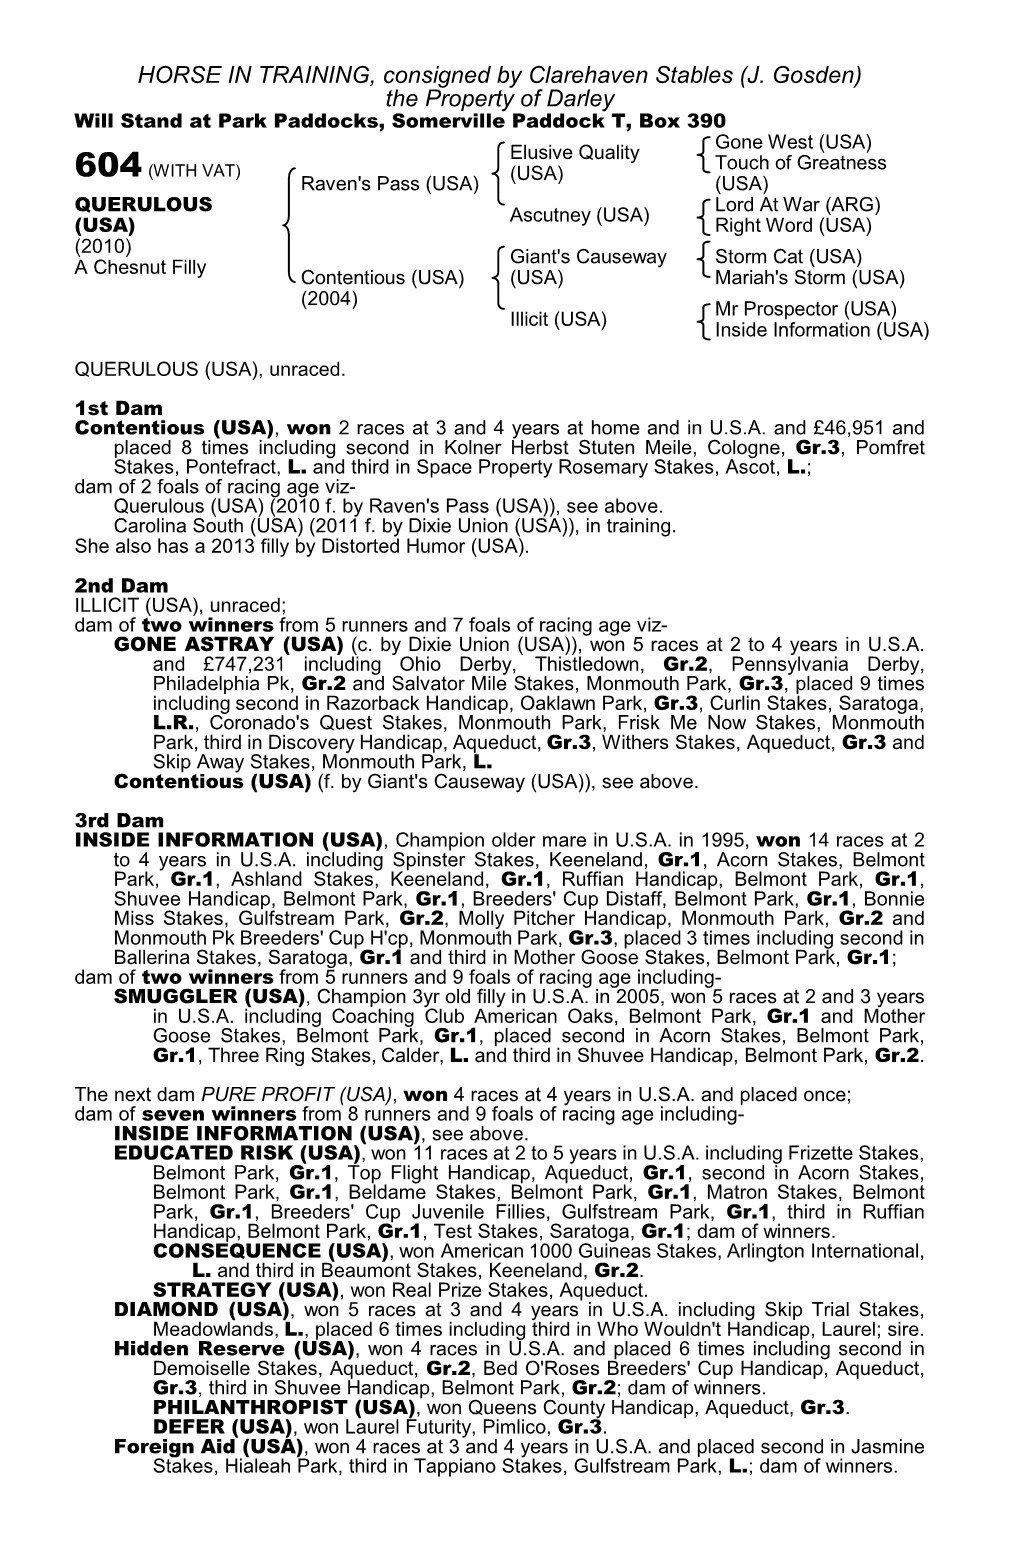 J. Gosden) the Property of Darley Will Stand at Park Paddocks, Somerville Paddock T, Box 390